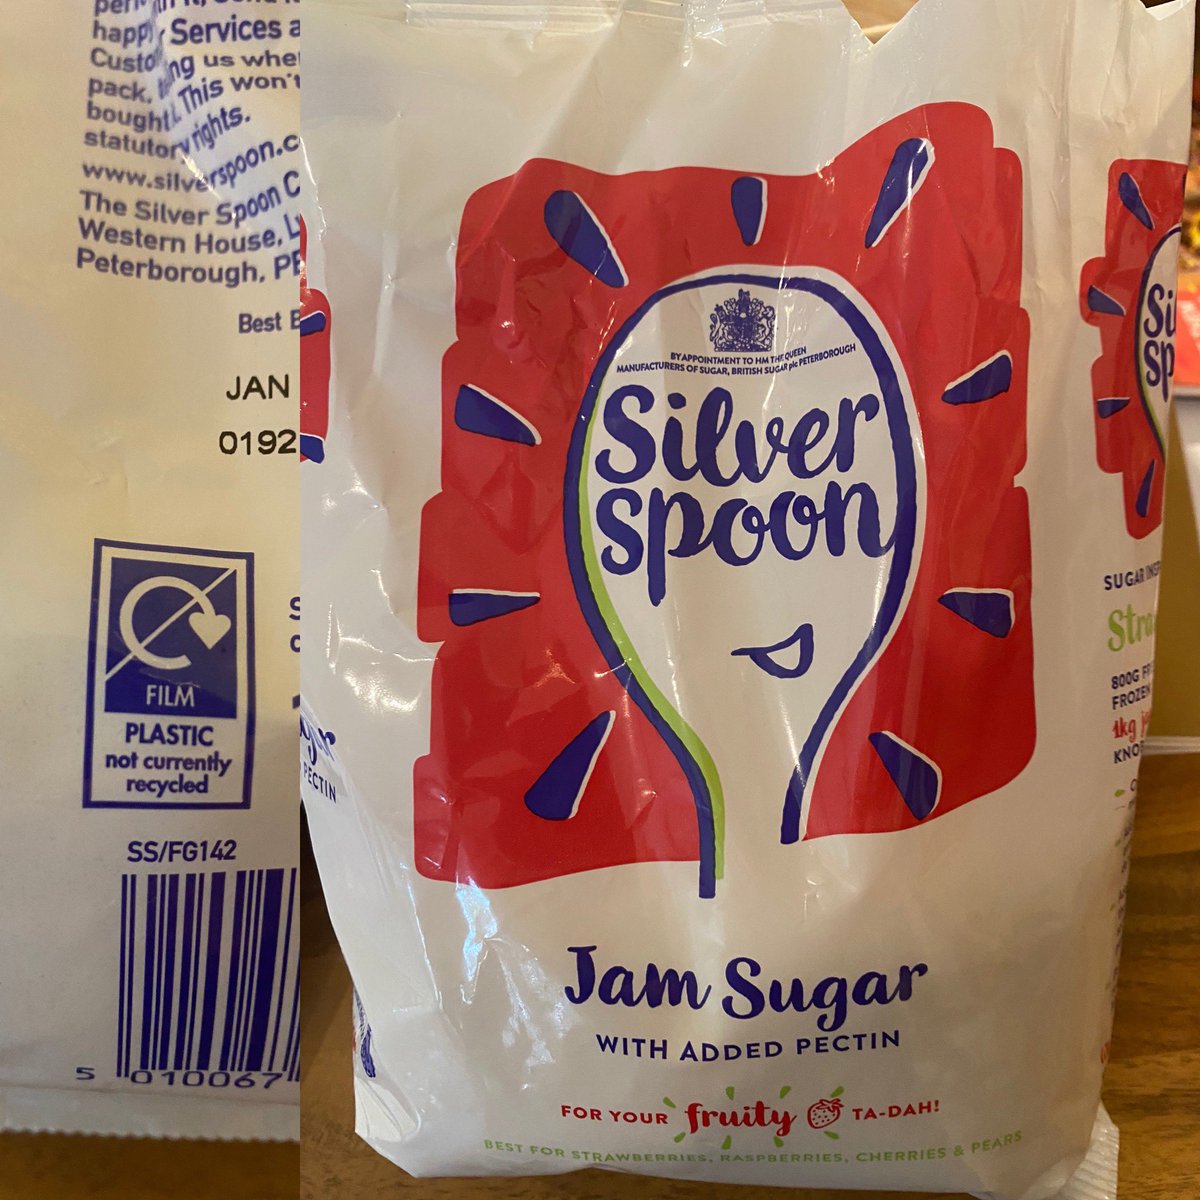 What are #silverspoon doing?! In this day and age when companies are doing everything to remove #plastic from their packaging, you’ve decided to start putting Jam Sugar IN #plastic instead of the paper it’s always come in! Please stop that!